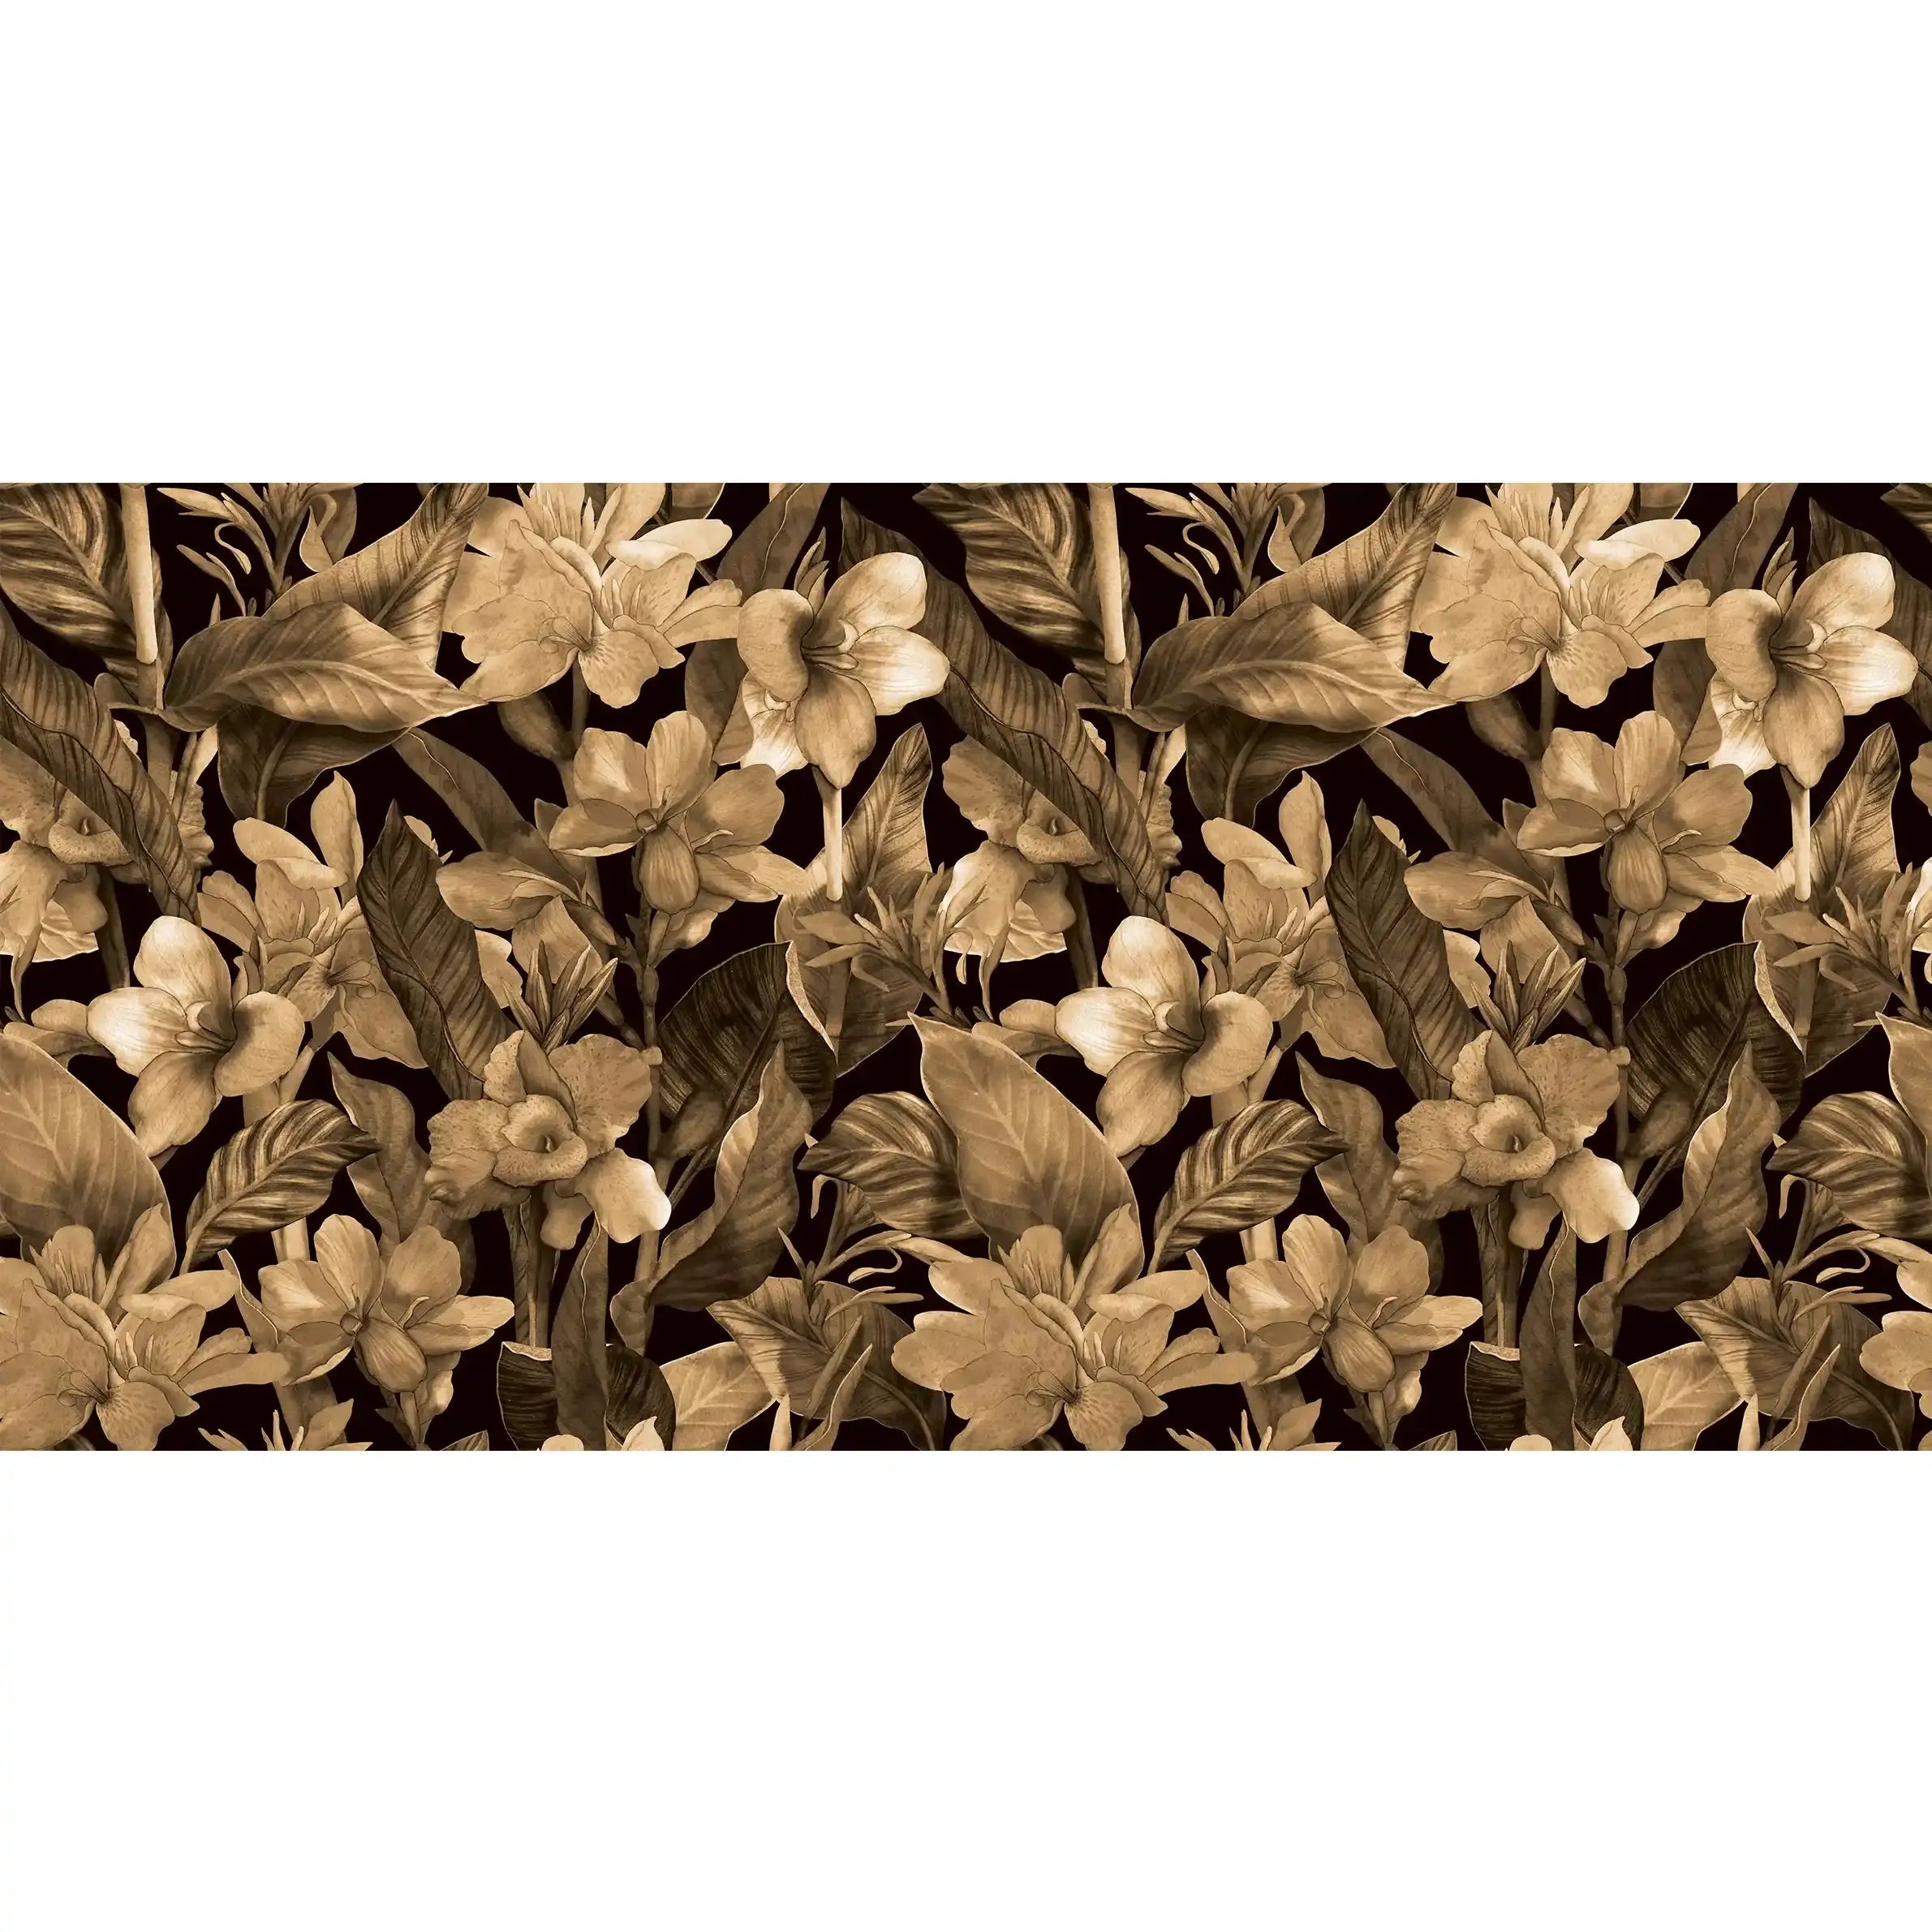 3074-D / Botanical Peel and Stick Wallpaper: Brown Floral & Black Leaf Pattern, Perfect for Accent Wall Decor - Artevella